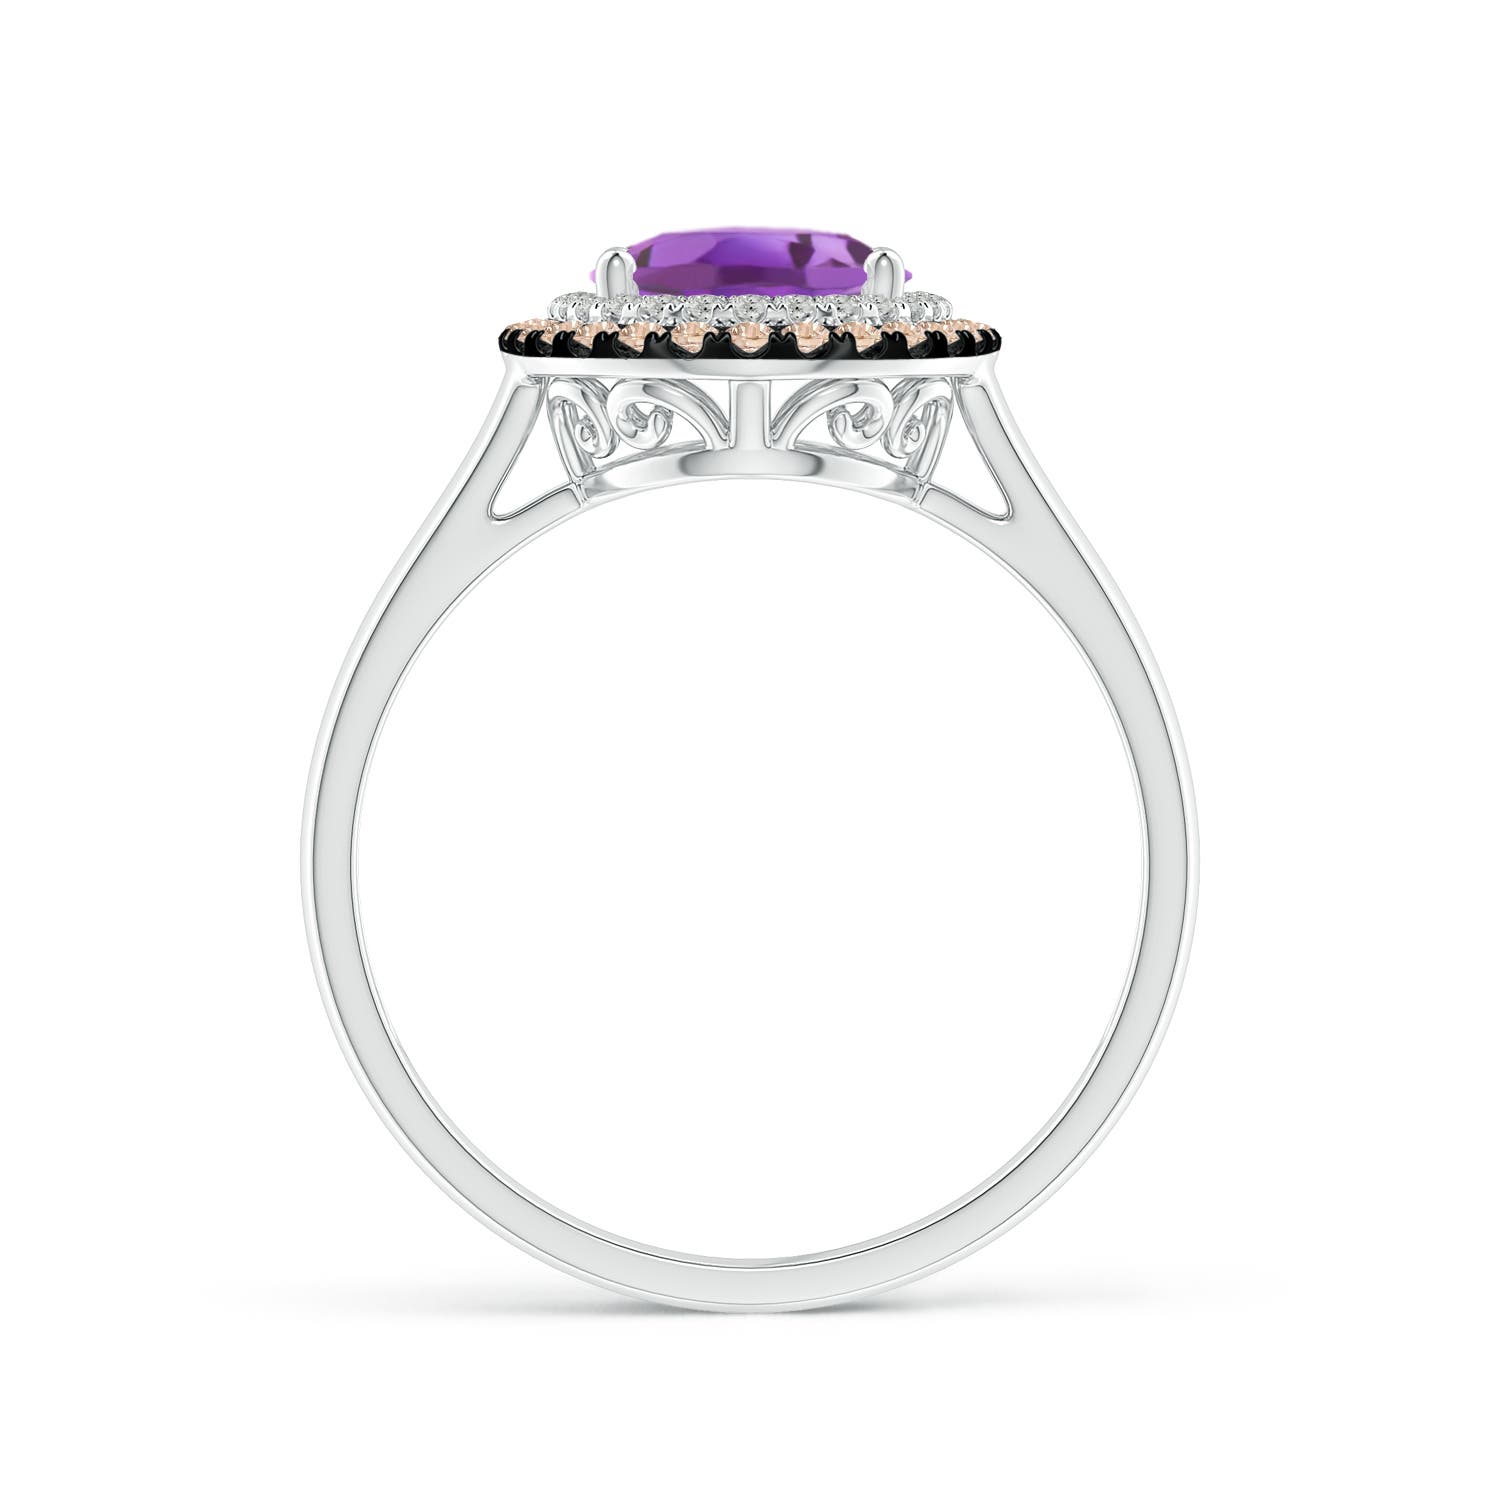 A - Amethyst / 1.87 CT / 14 KT White Gold